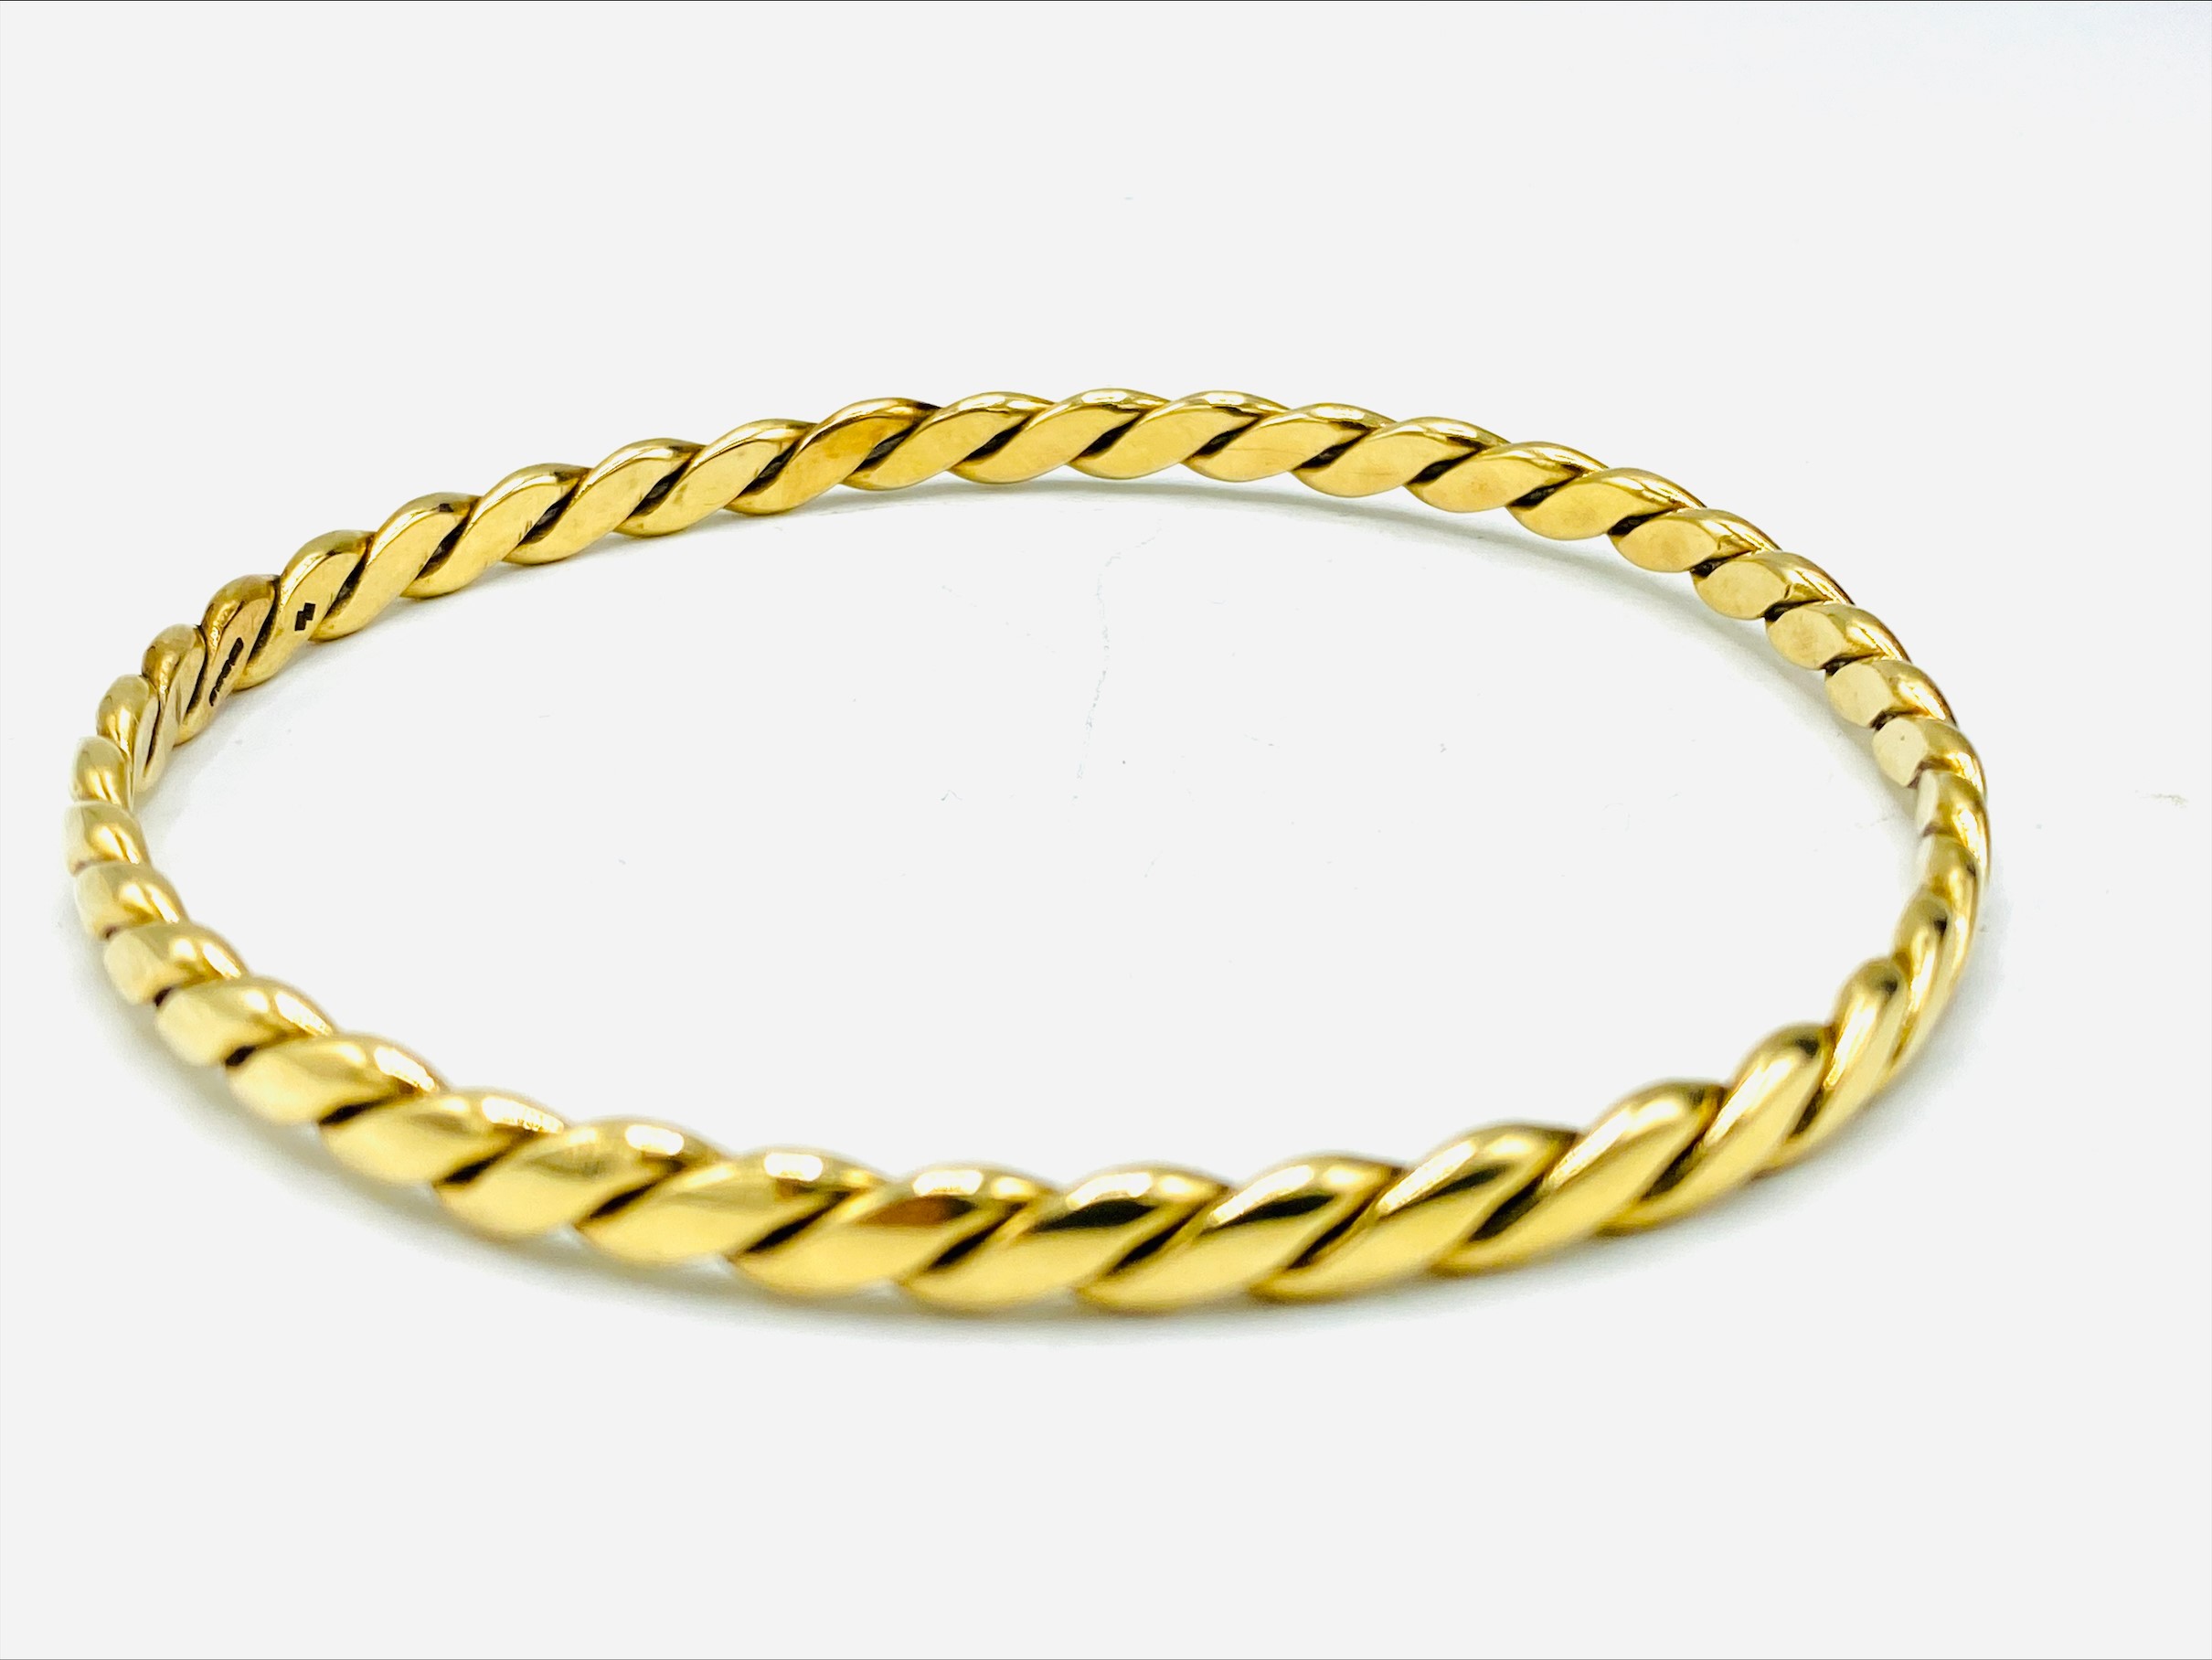 9ct gold twisted wire bangle - Image 4 of 4